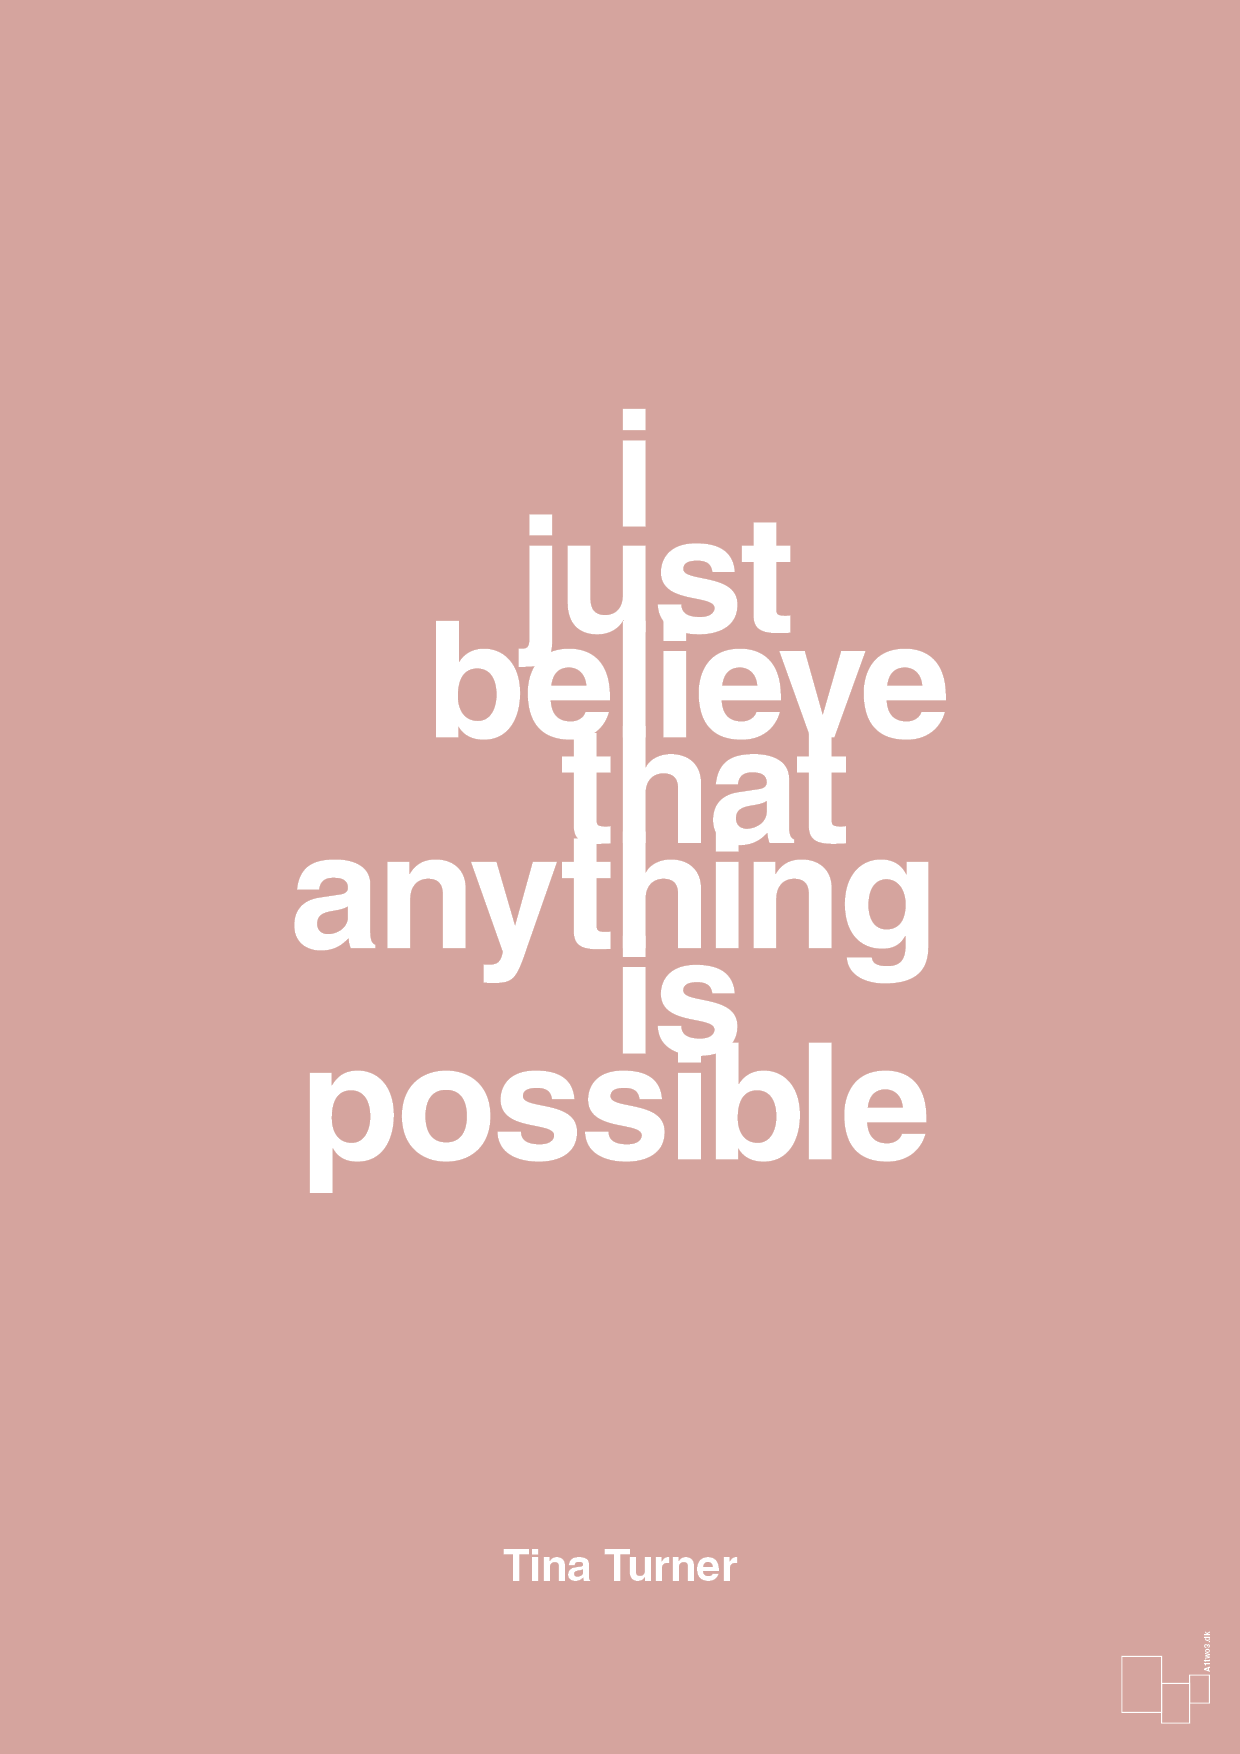 i just believe that anything is possible - Plakat med Citater i Bubble Shell